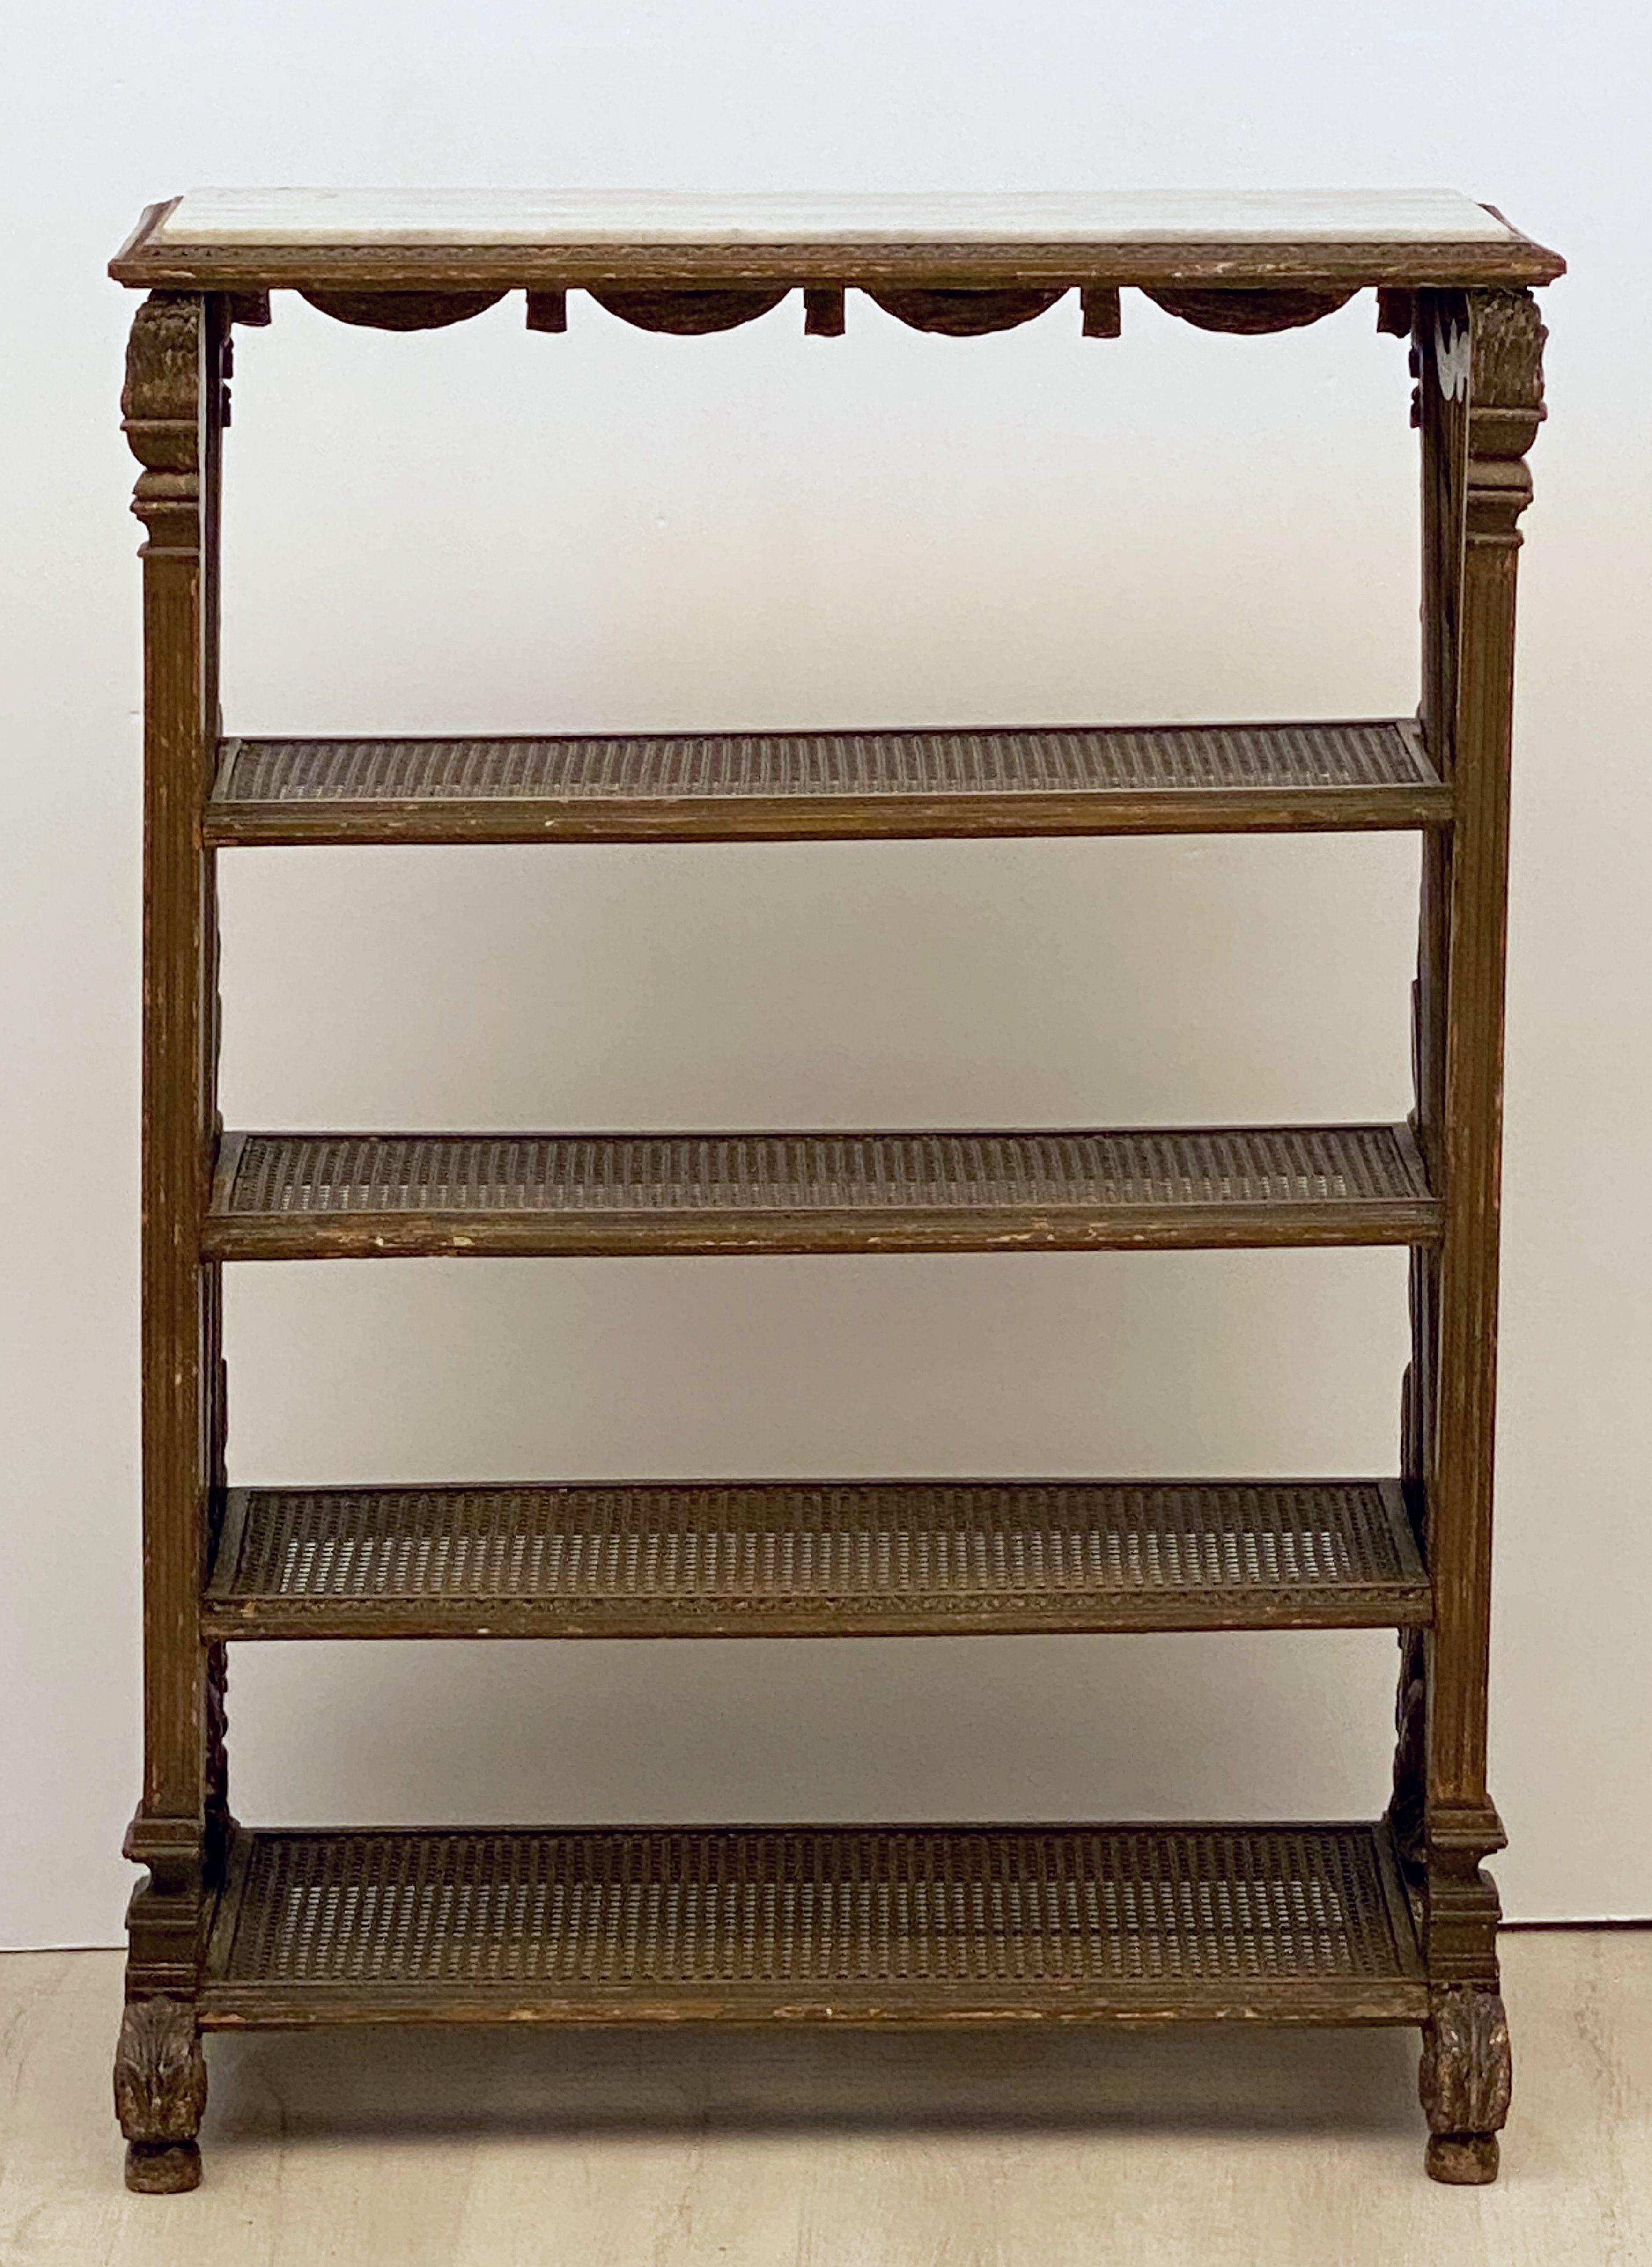 A fine French étagère or shelving unit from the 19th century, featuring a marble inset to the top over four shelves.
Each shelf with perfectly intact cane, the sides in the form of stylized harps, flanked with carved wood bulrushes.
The whole